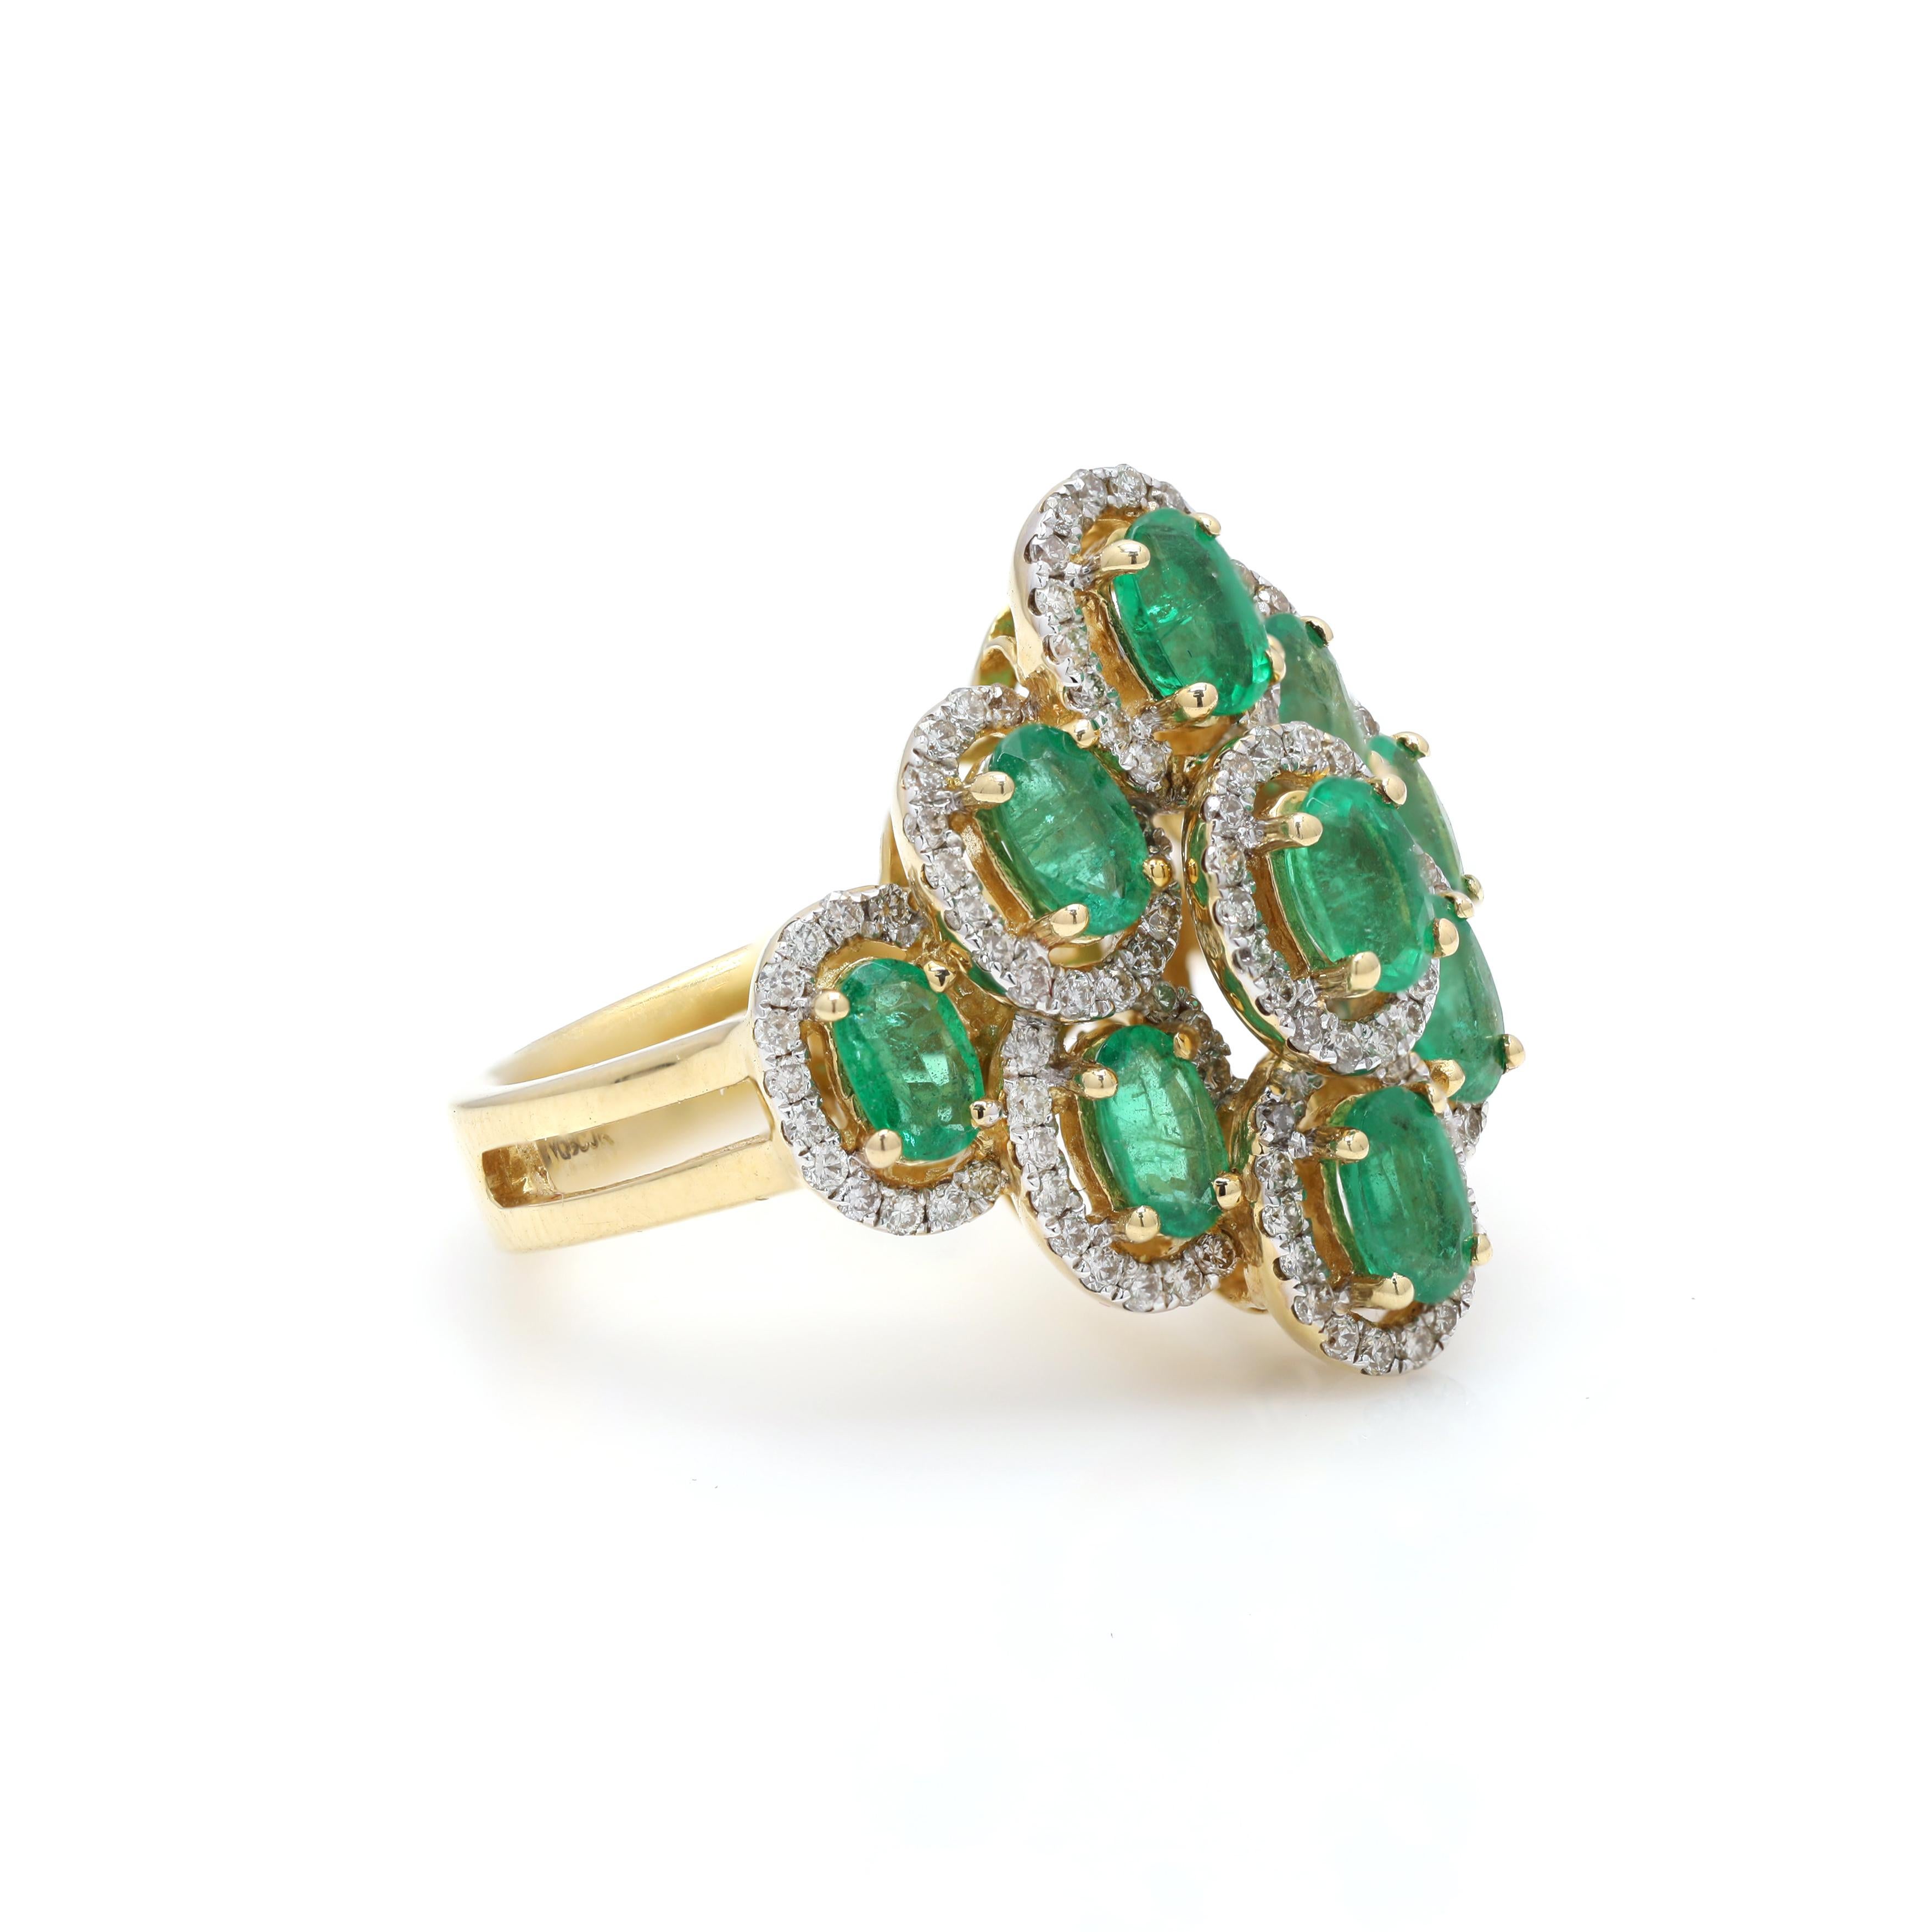 For Sale:  Estate 14k Yellow Gold 2.25 Carat Diamond Emerald Ring Cluster Cocktail Ring 2